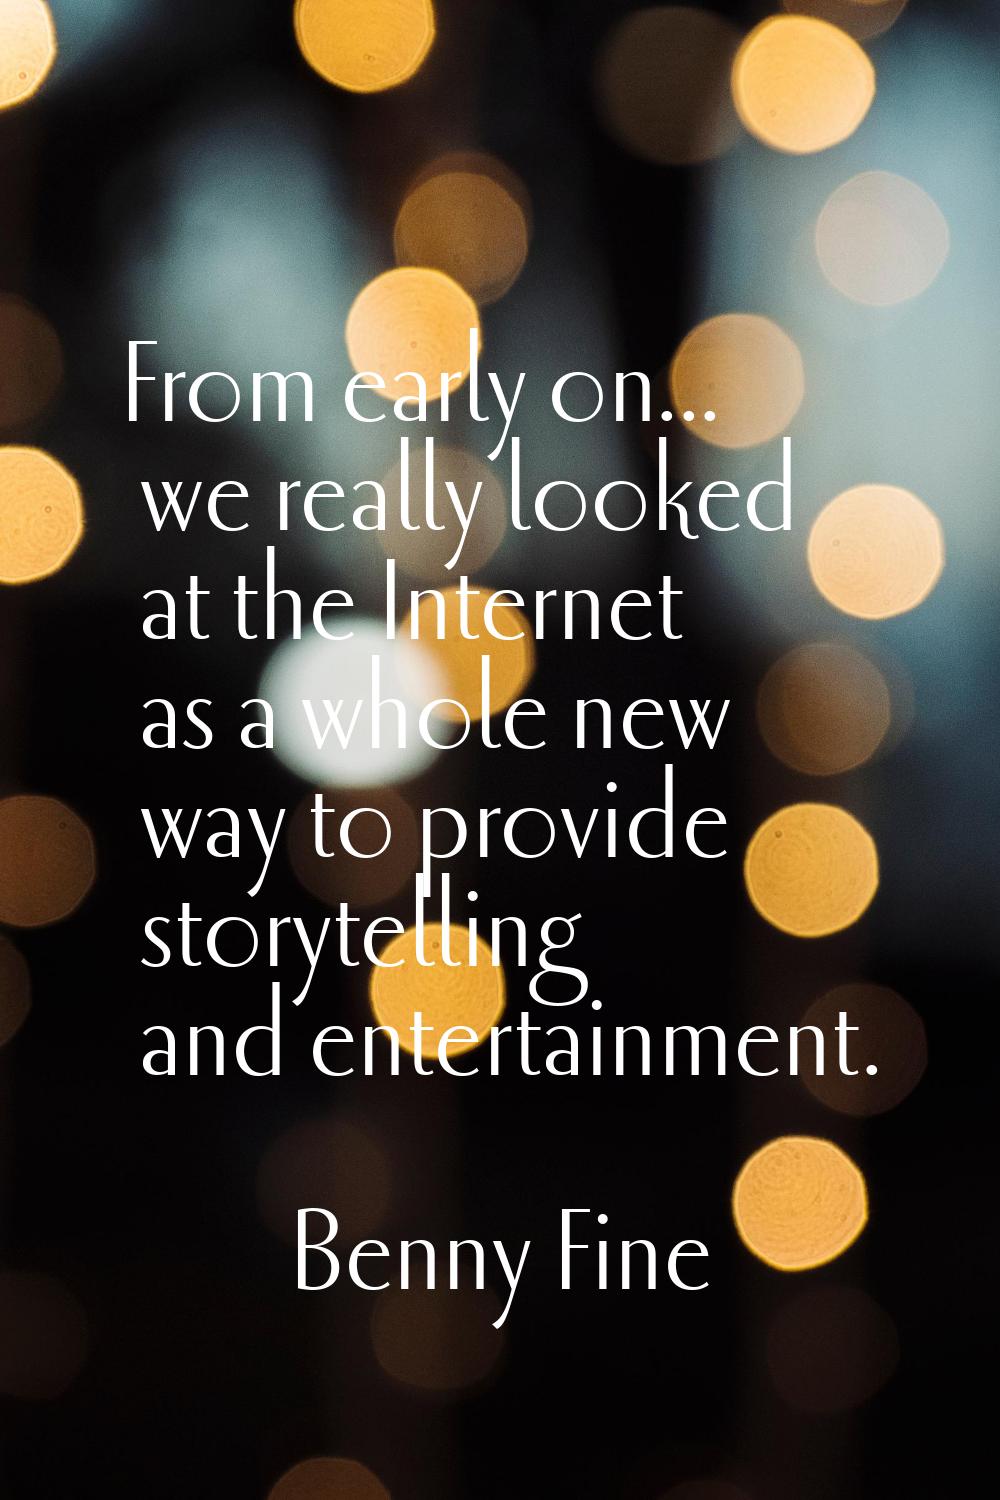 From early on... we really looked at the Internet as a whole new way to provide storytelling and en